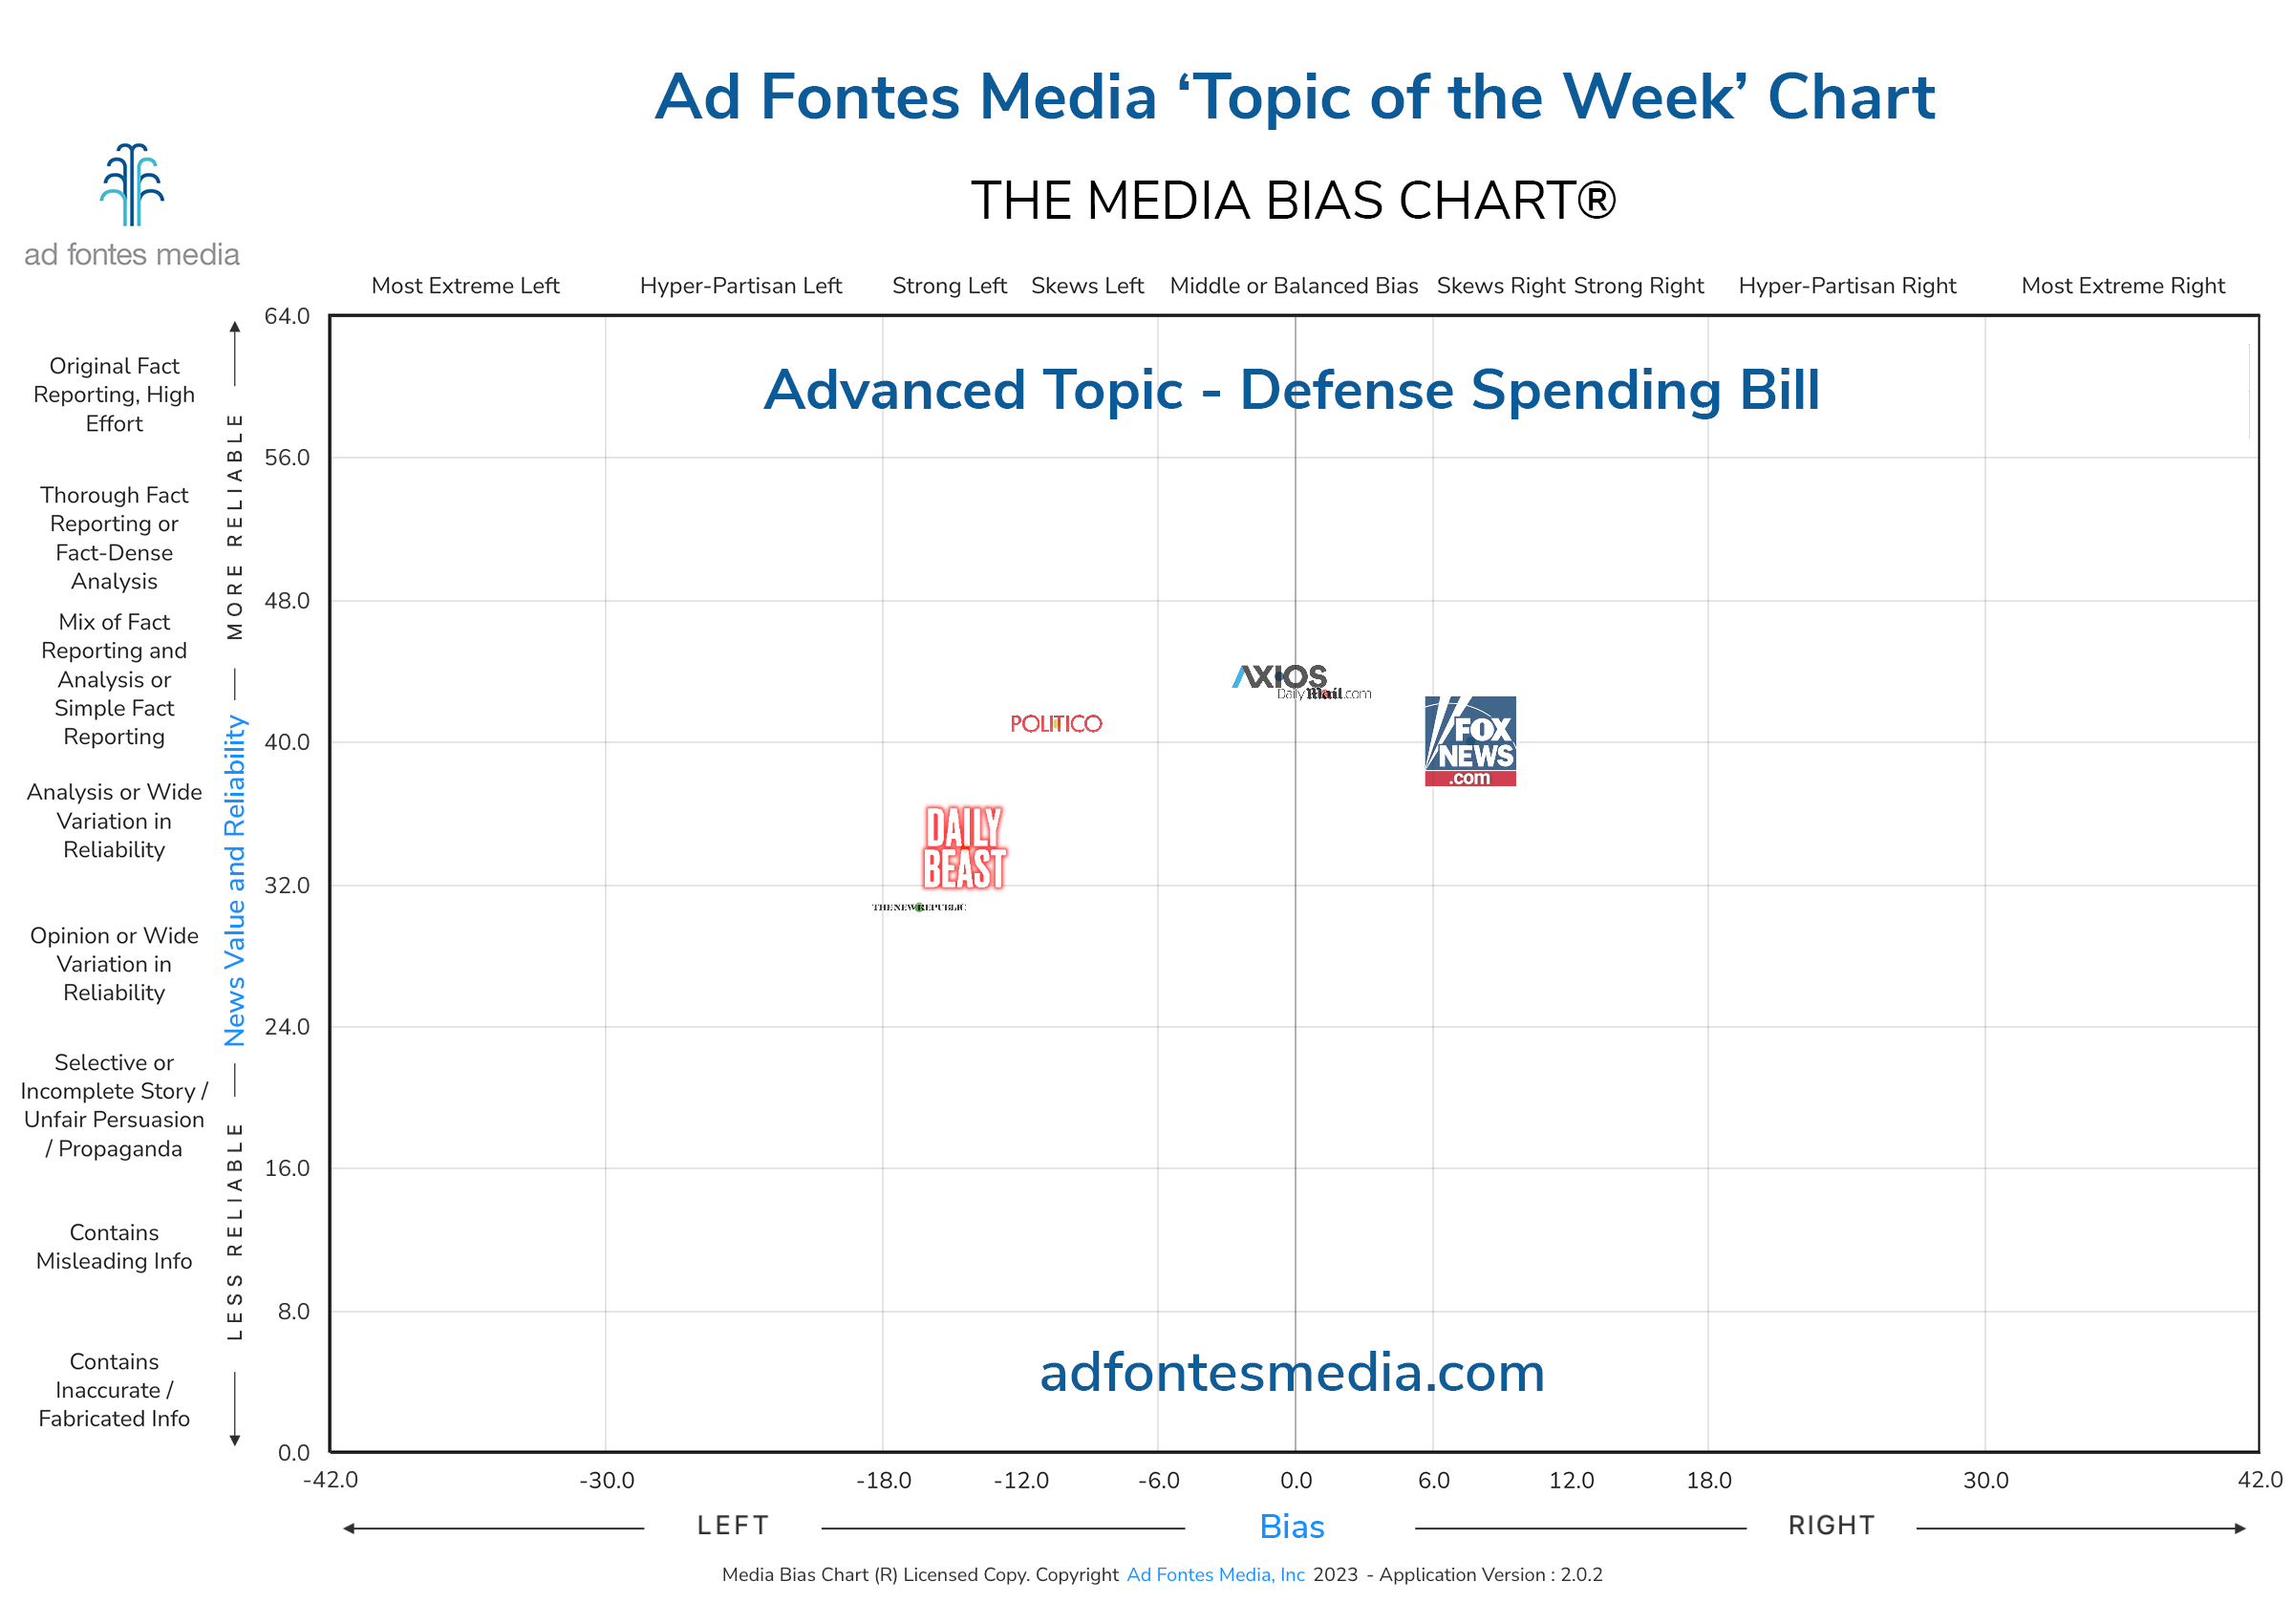 Scores of the Defense Spending Bill articles on the chart